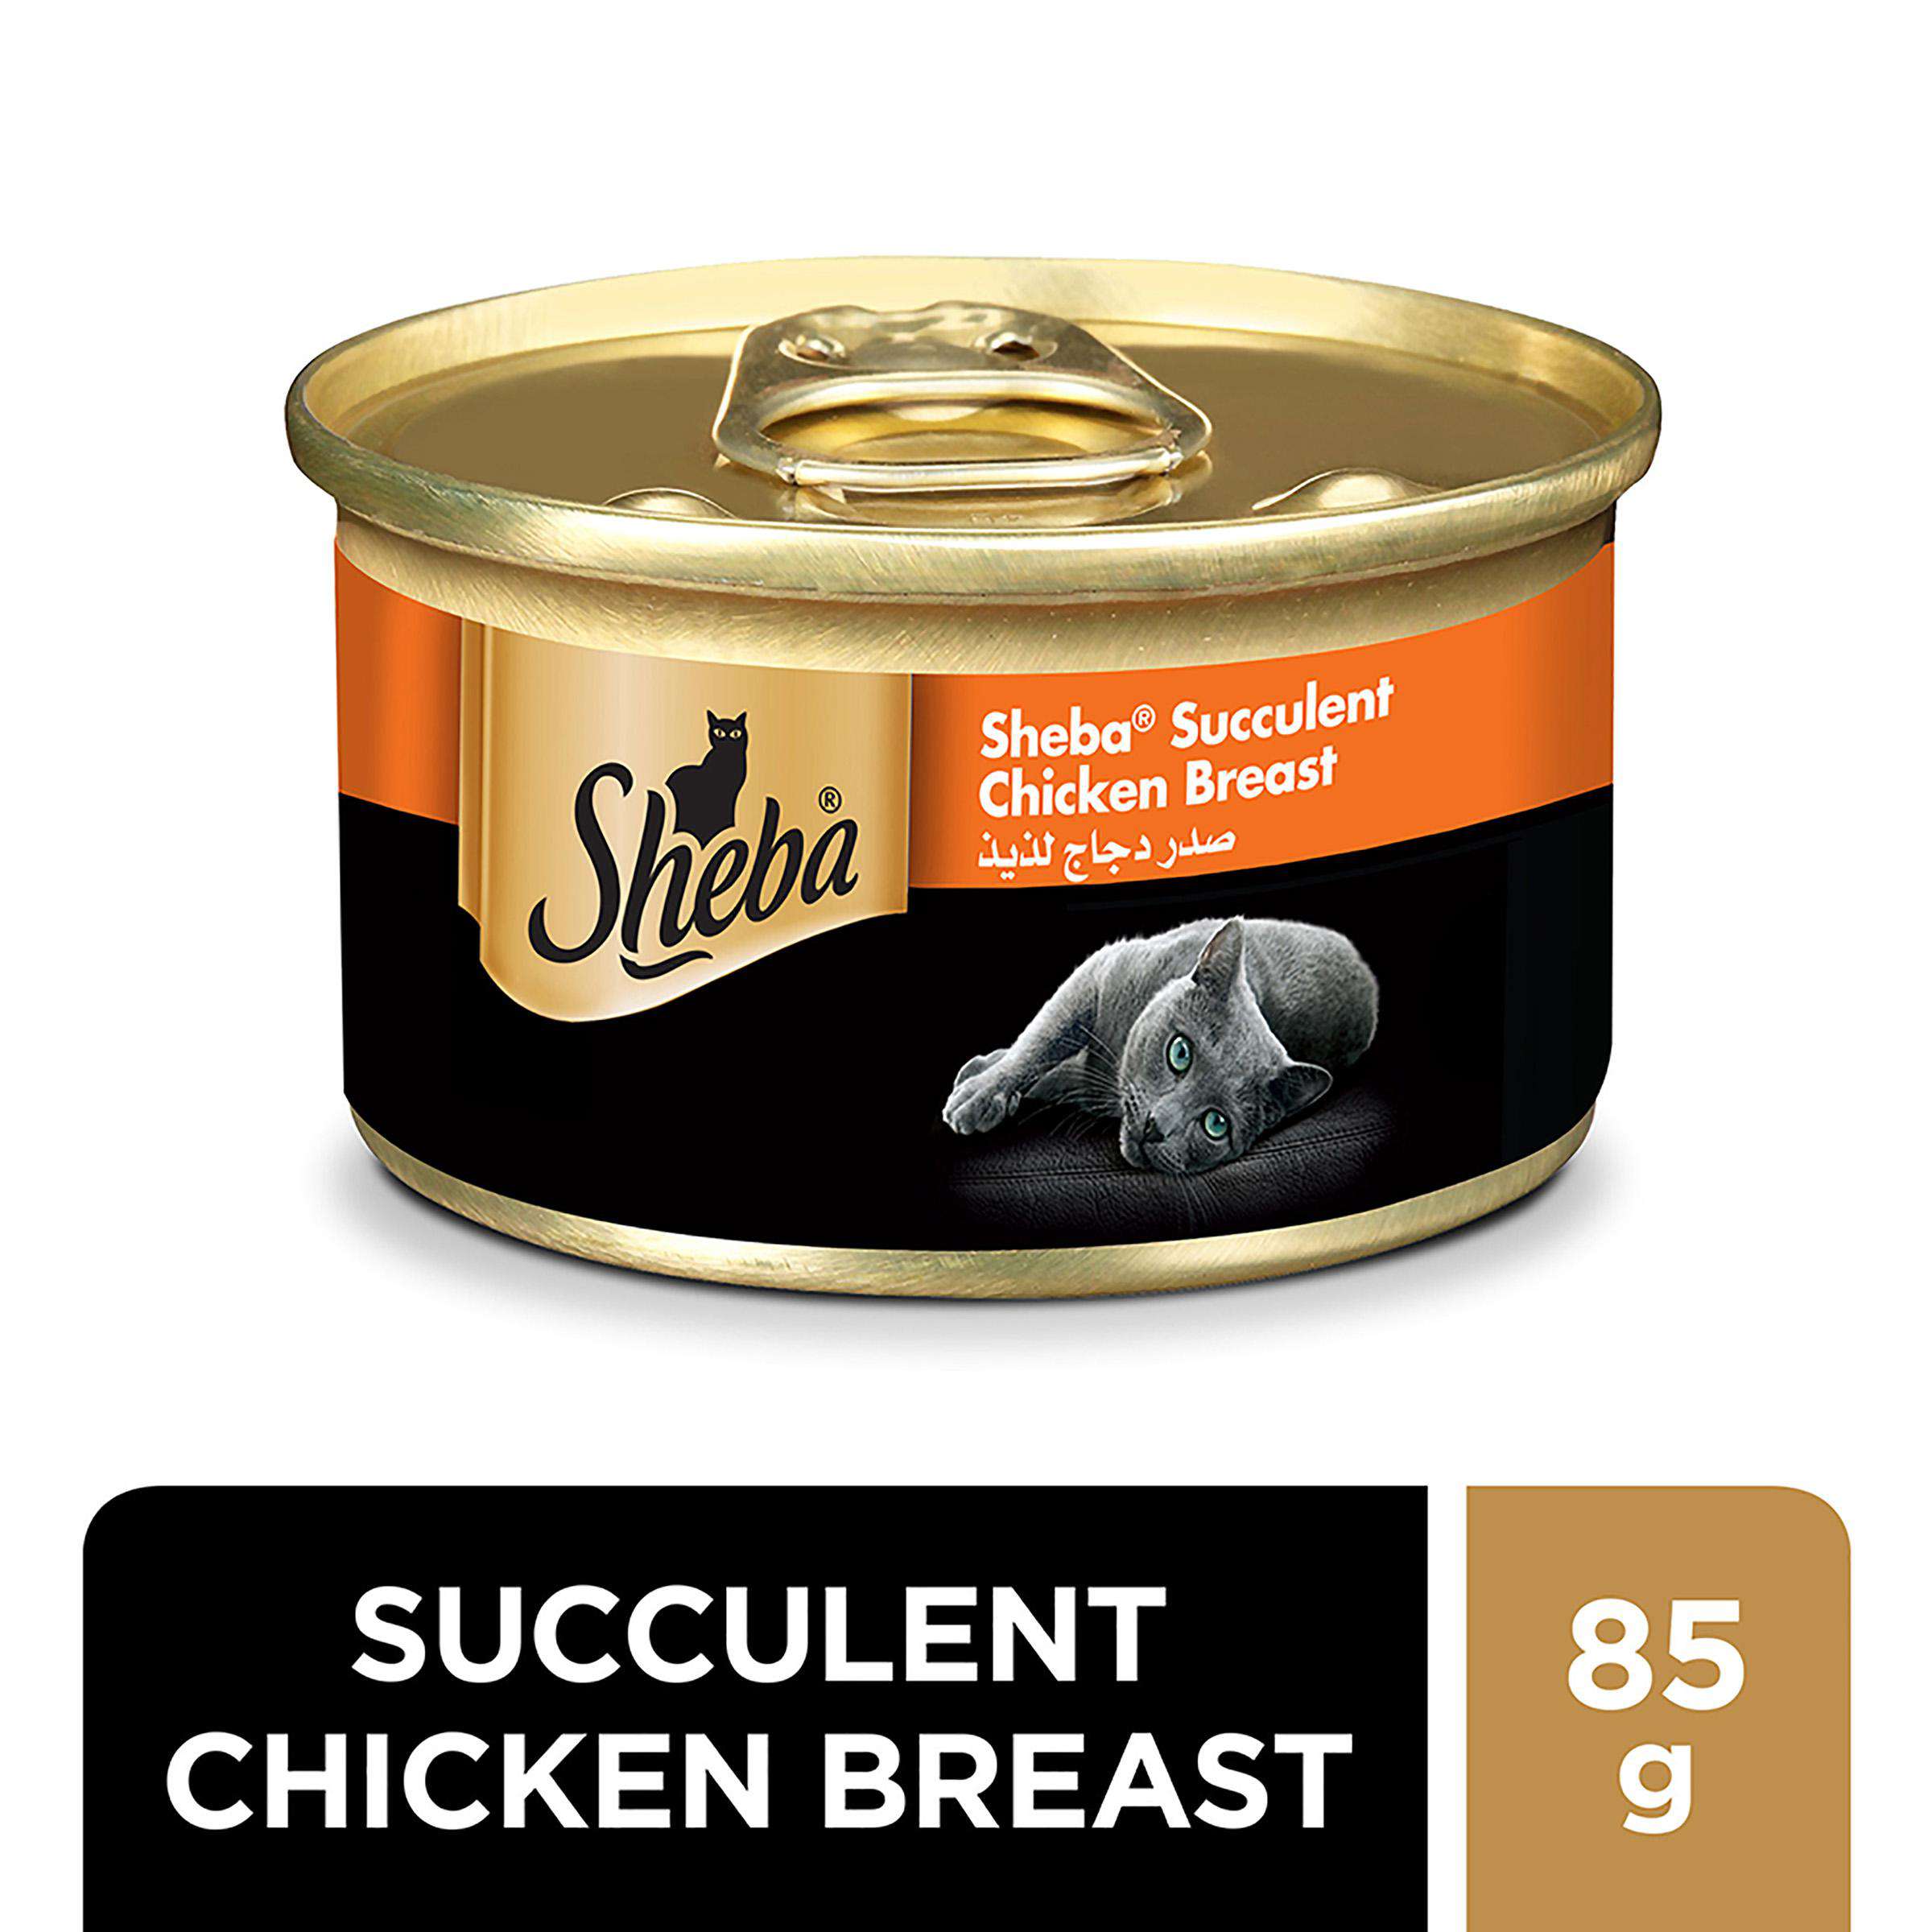 Sheba Succulent Chicken Breast Canned Cat Food - 85 g